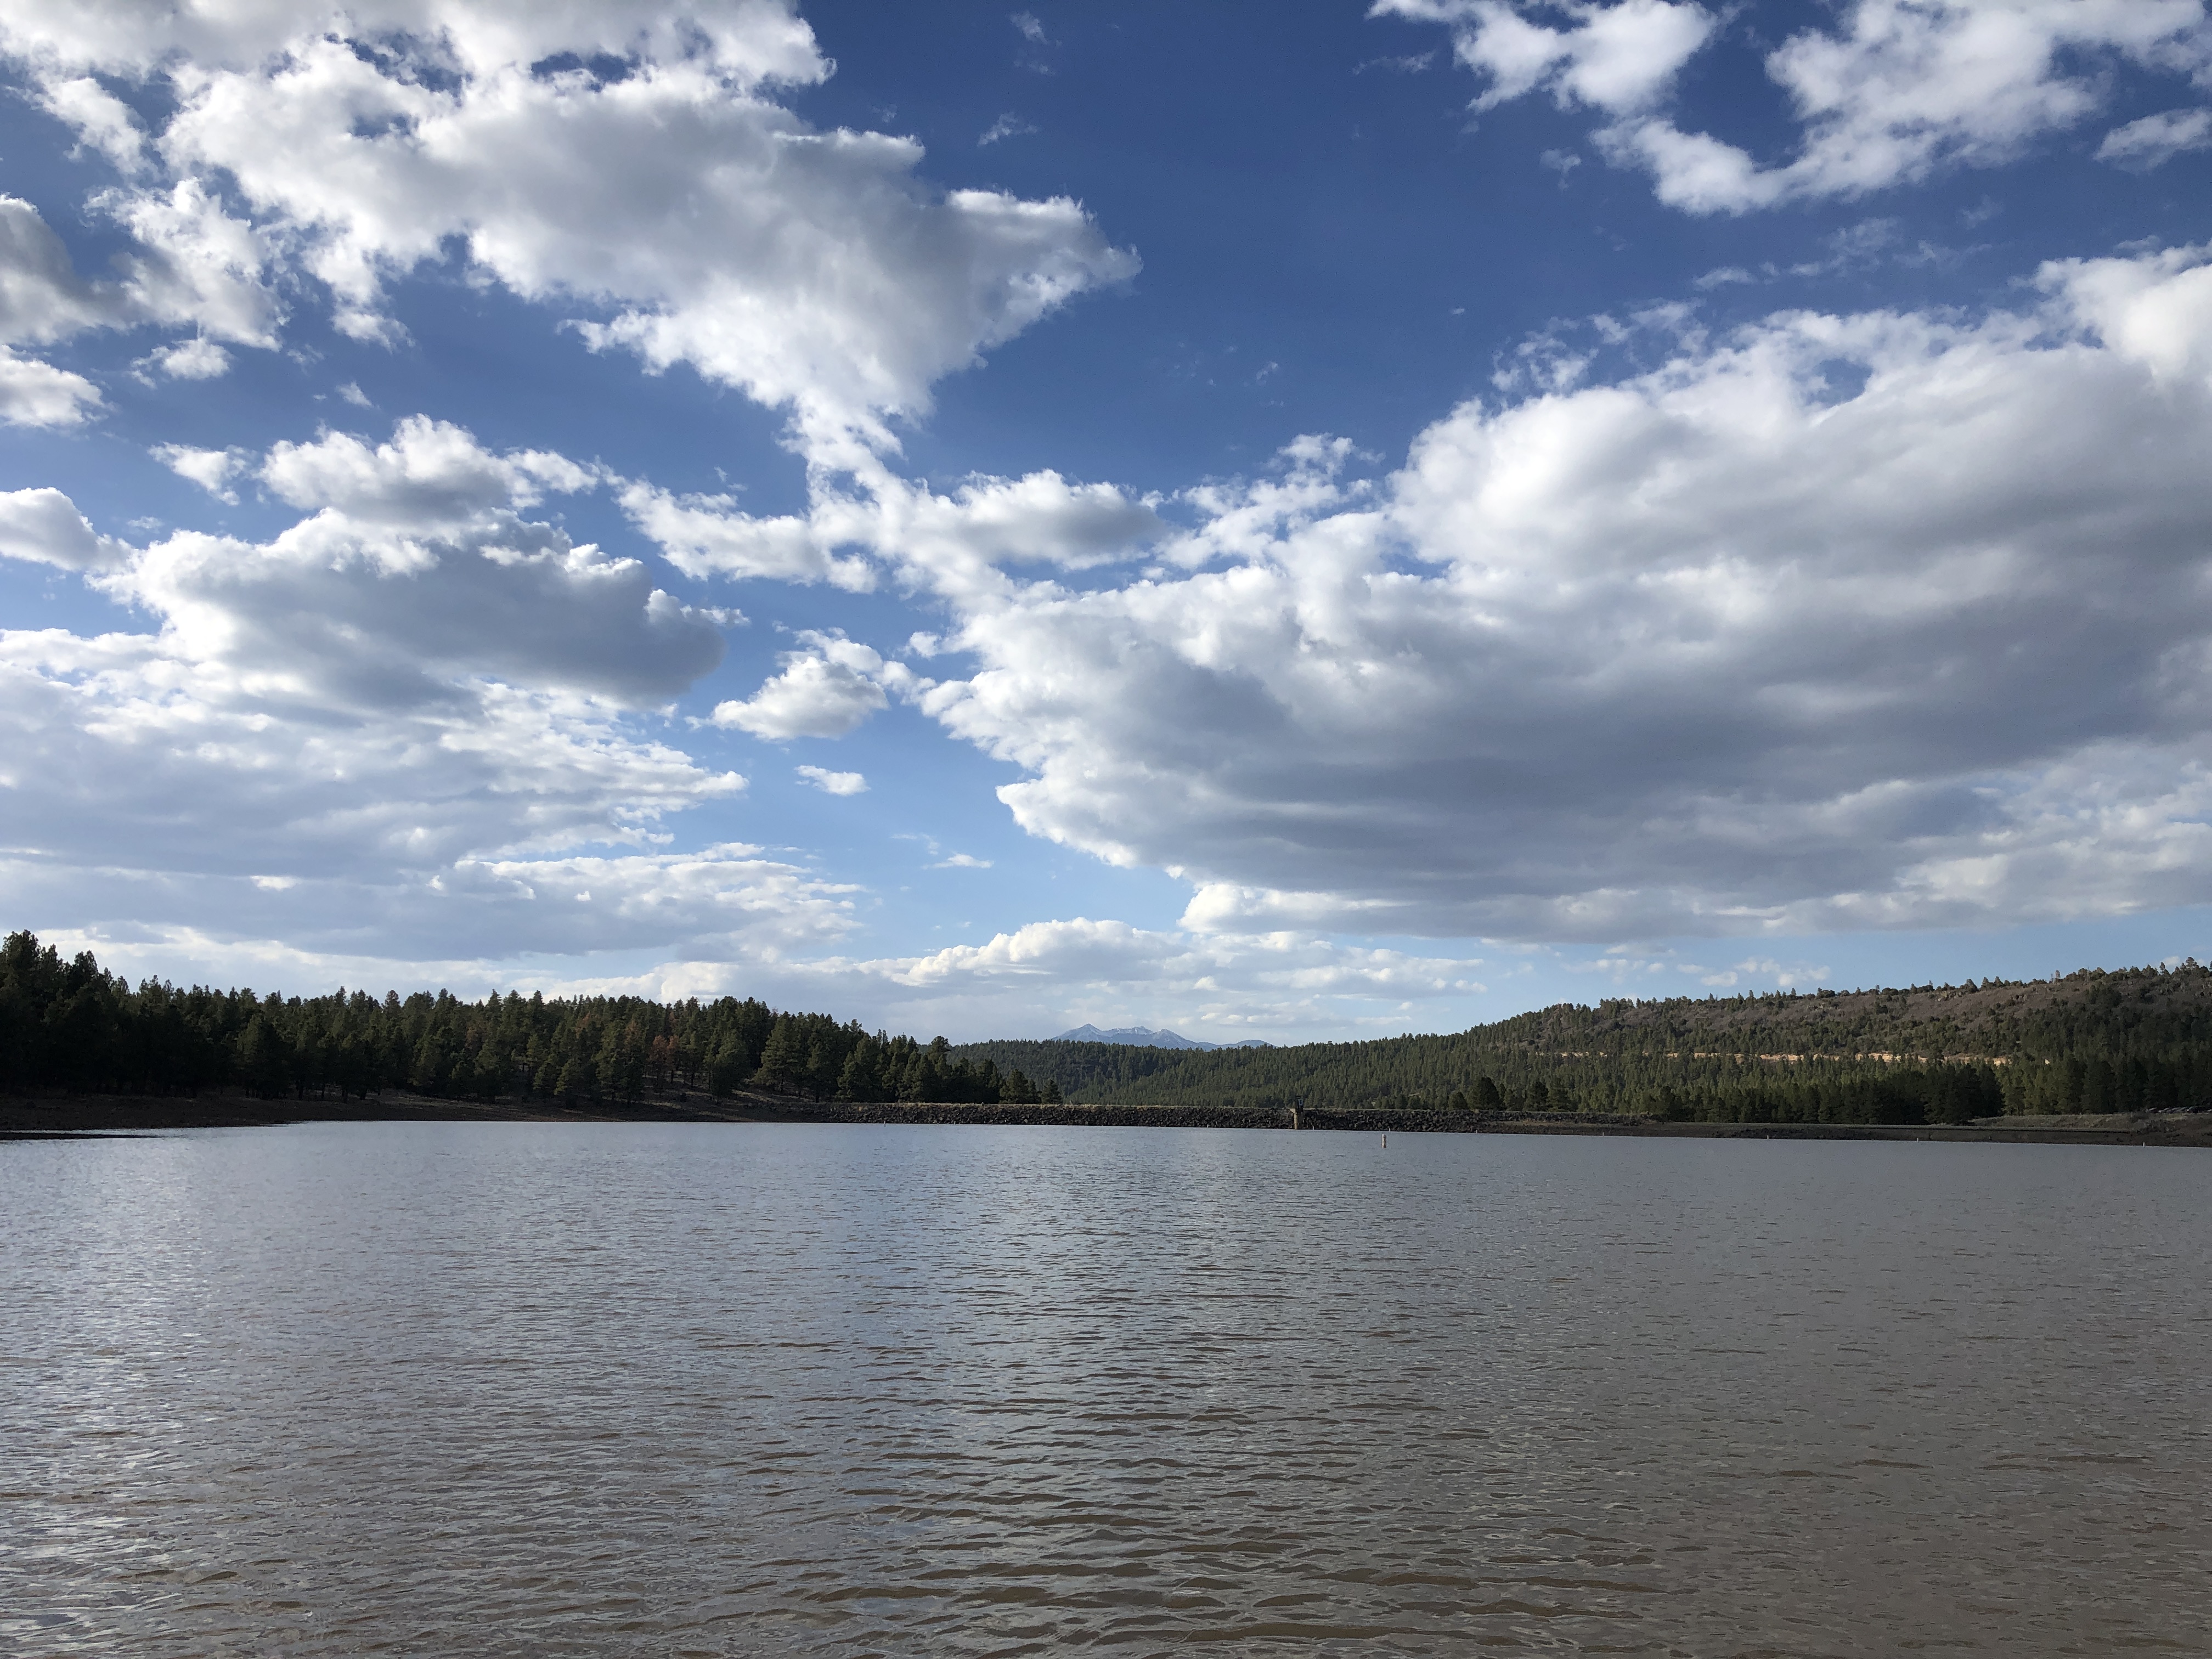 A ripply lake with pine trees on the horizon and scattered clouds above. In the far distance is a tall peak. 